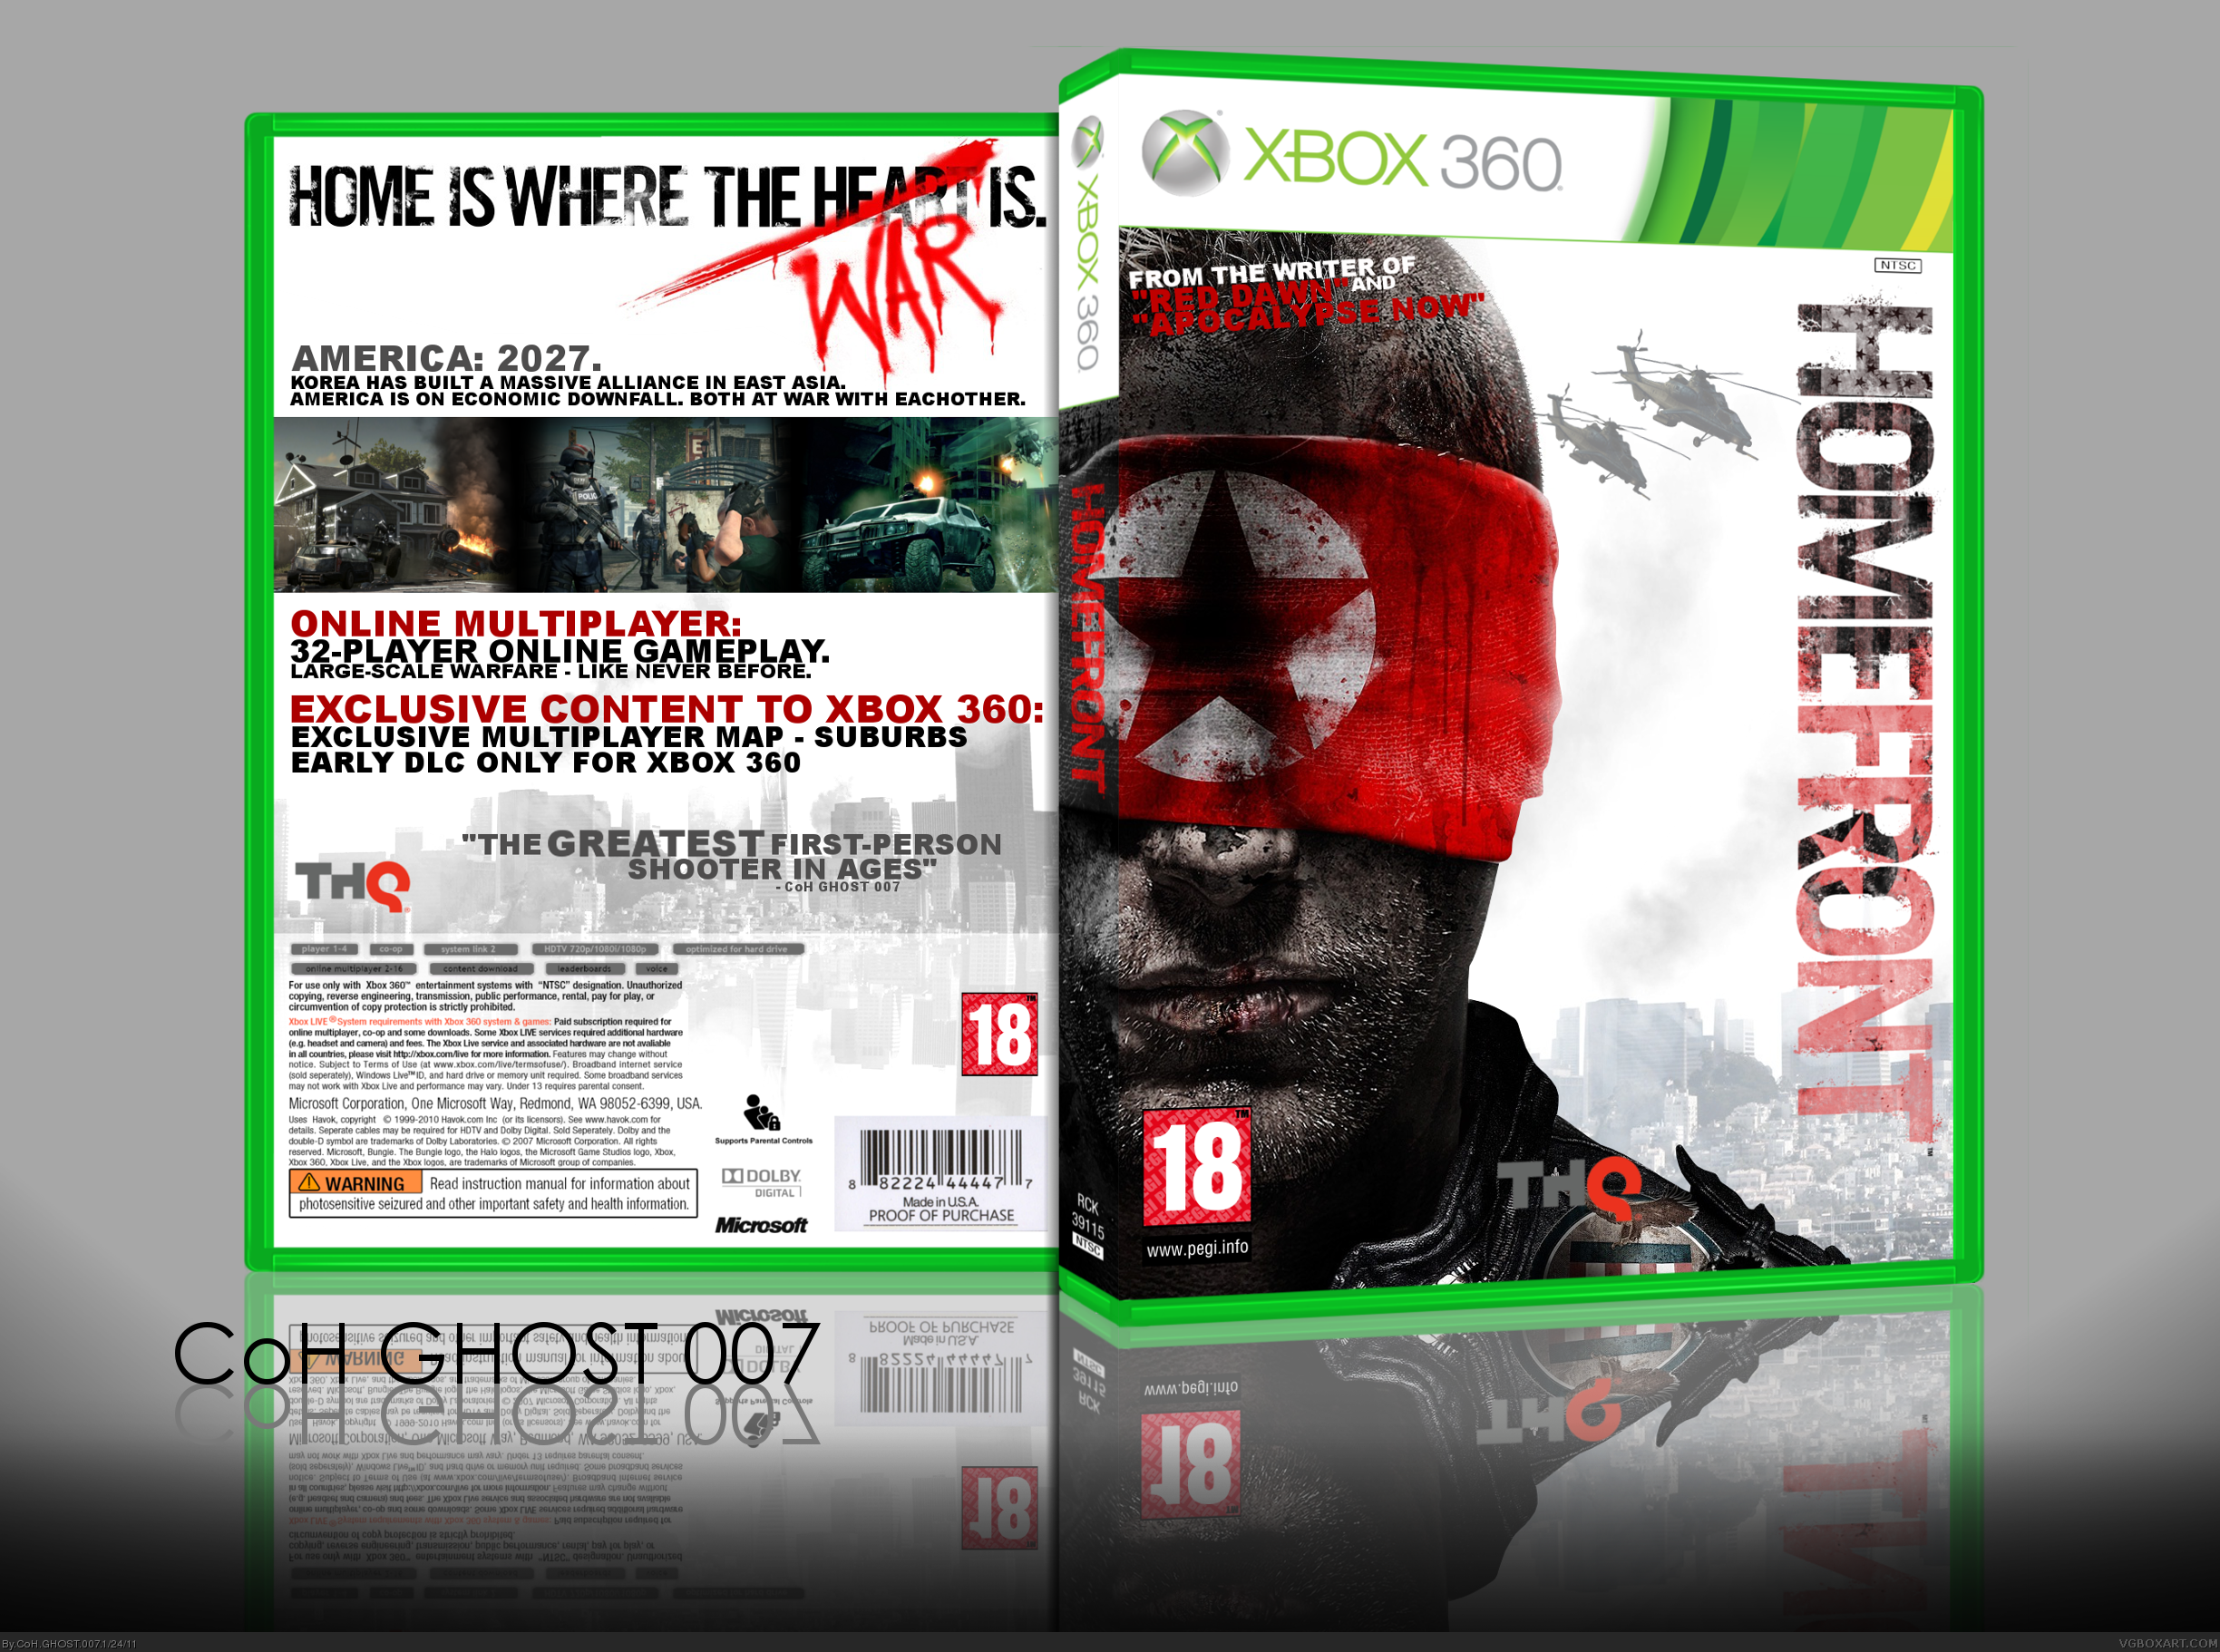 Homefront box cover